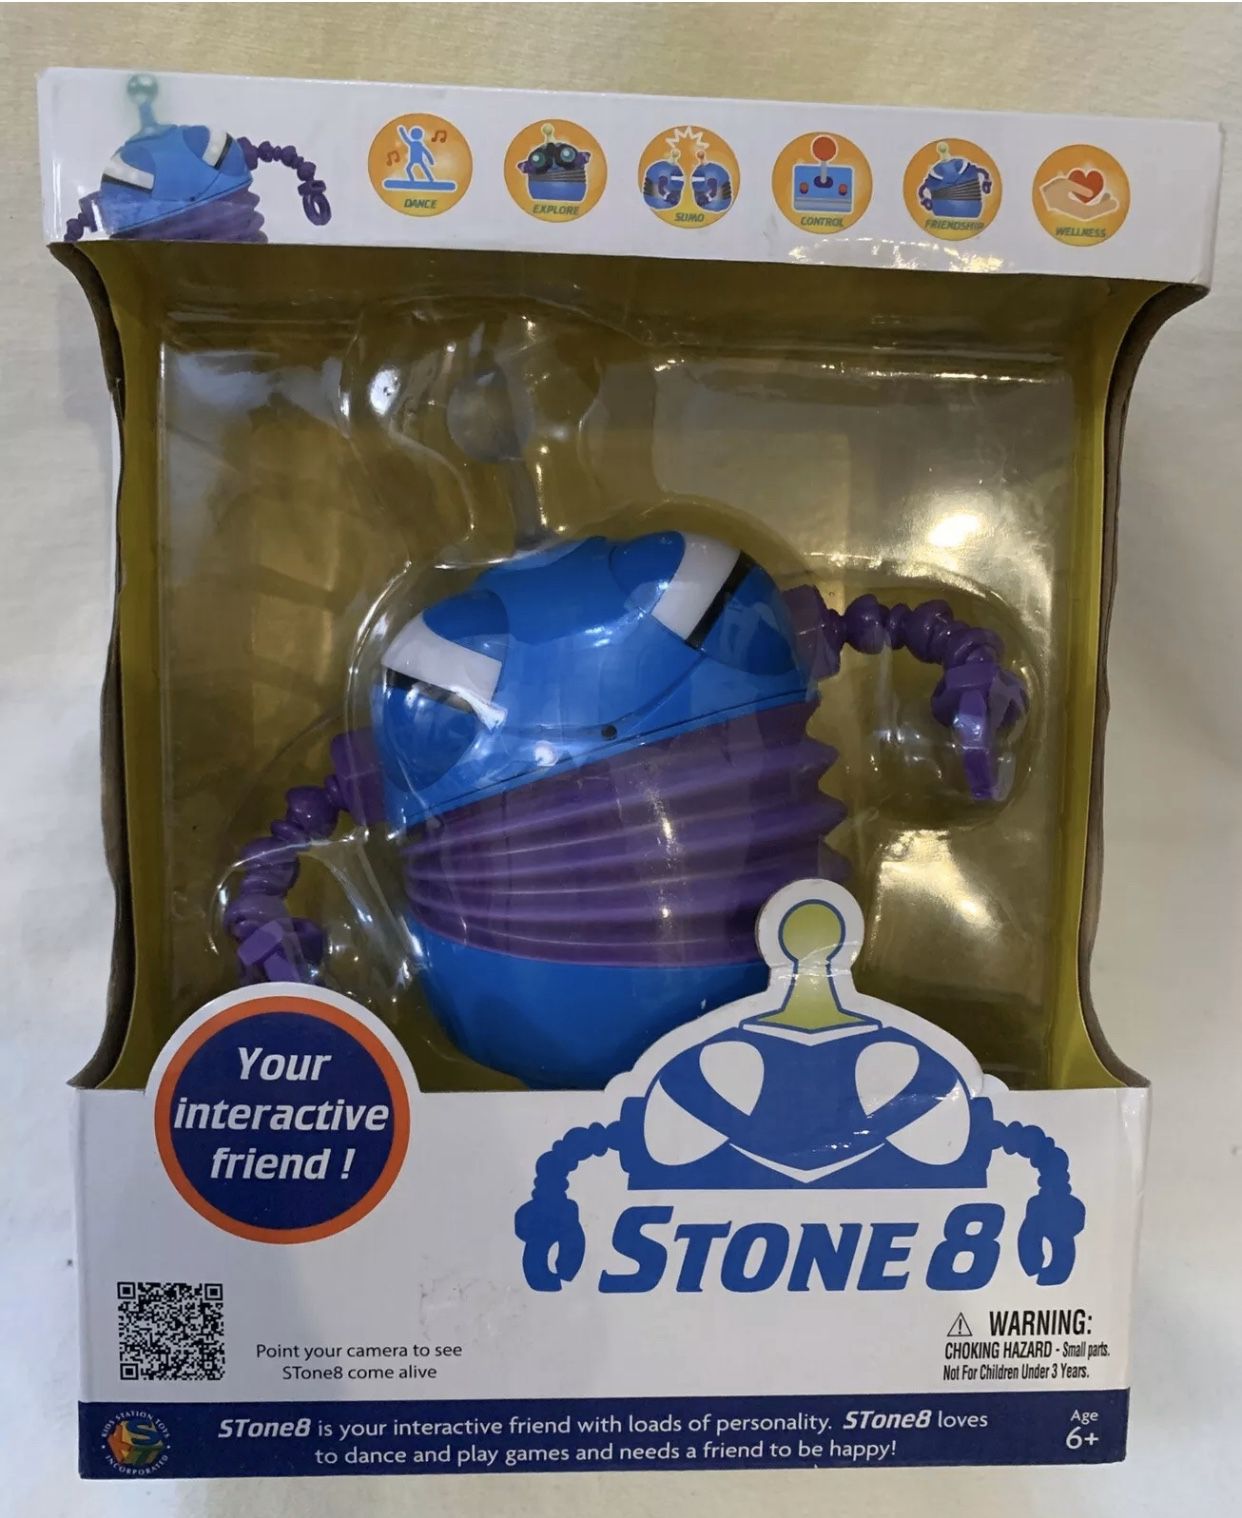 Stone8 Robot - Blue Kid's Interactive Toy Robot Play Games Works with Apple